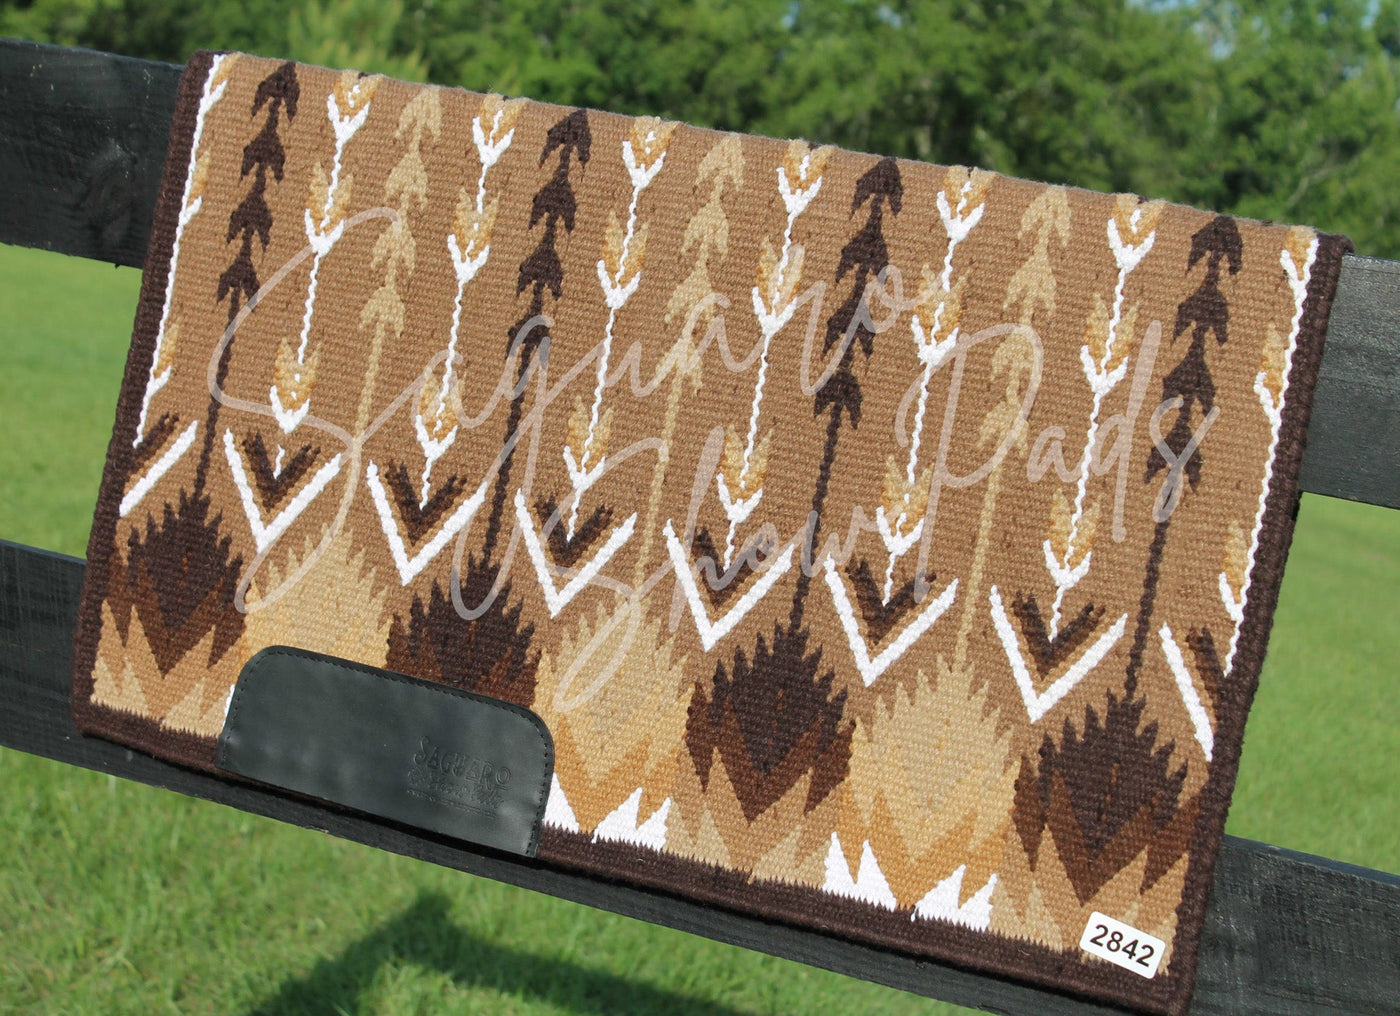 #2842 "Scout" Ranch Pad - Re-Order